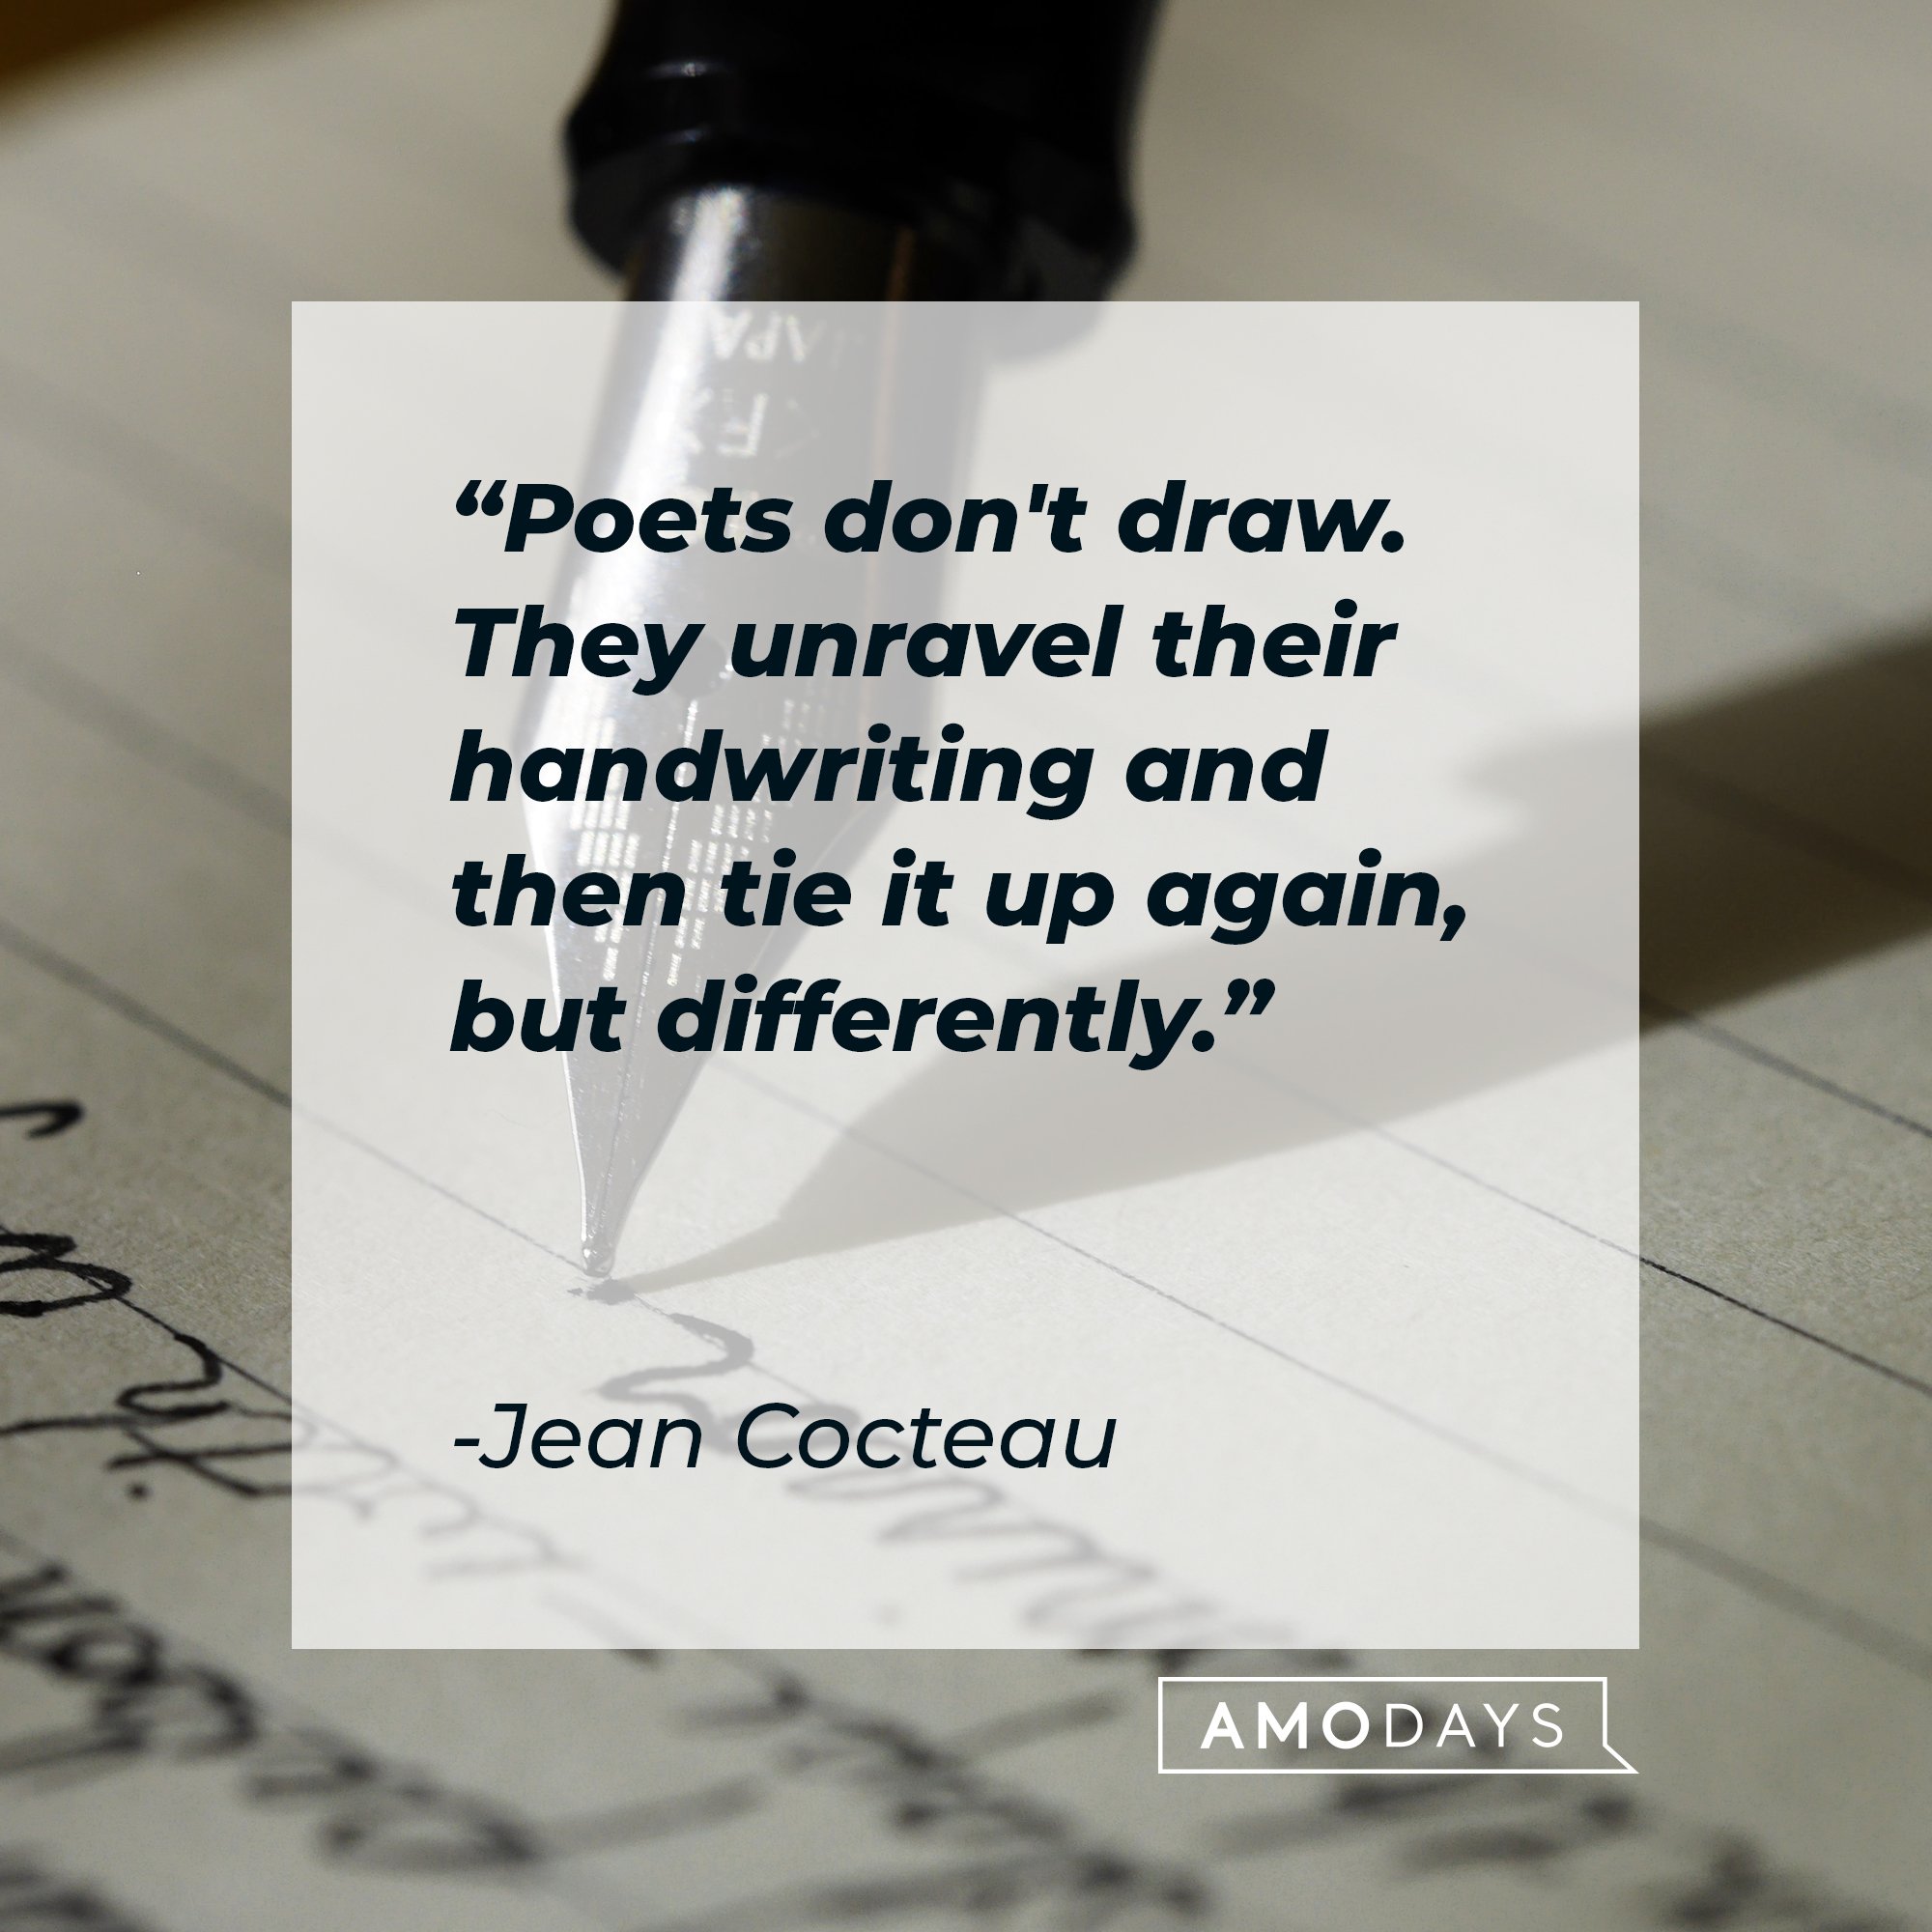 Jean Cocteau’s quote: "Poets don't draw. They unravel their handwriting and then tie it up again, but differently." | Image: AmoDays  